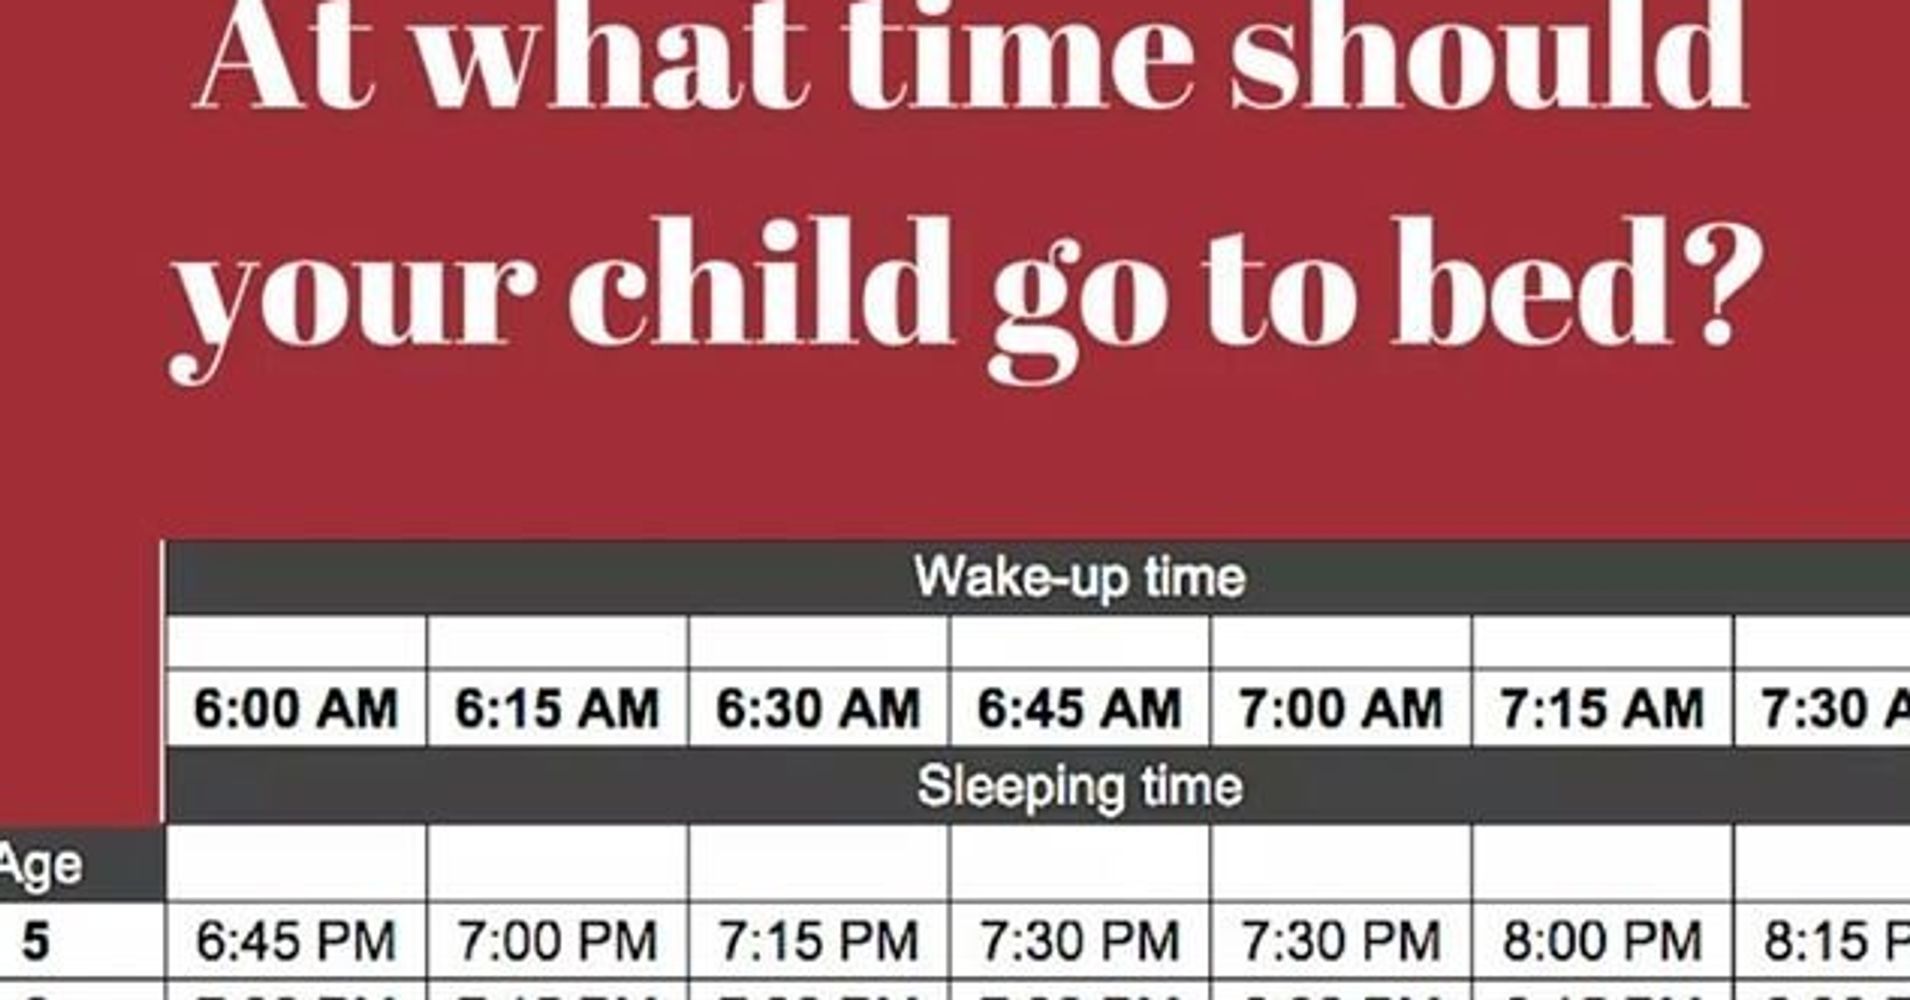 'Unrealistic' Bedtime Rules Shared By Elementary School Go Viral | HuffPost